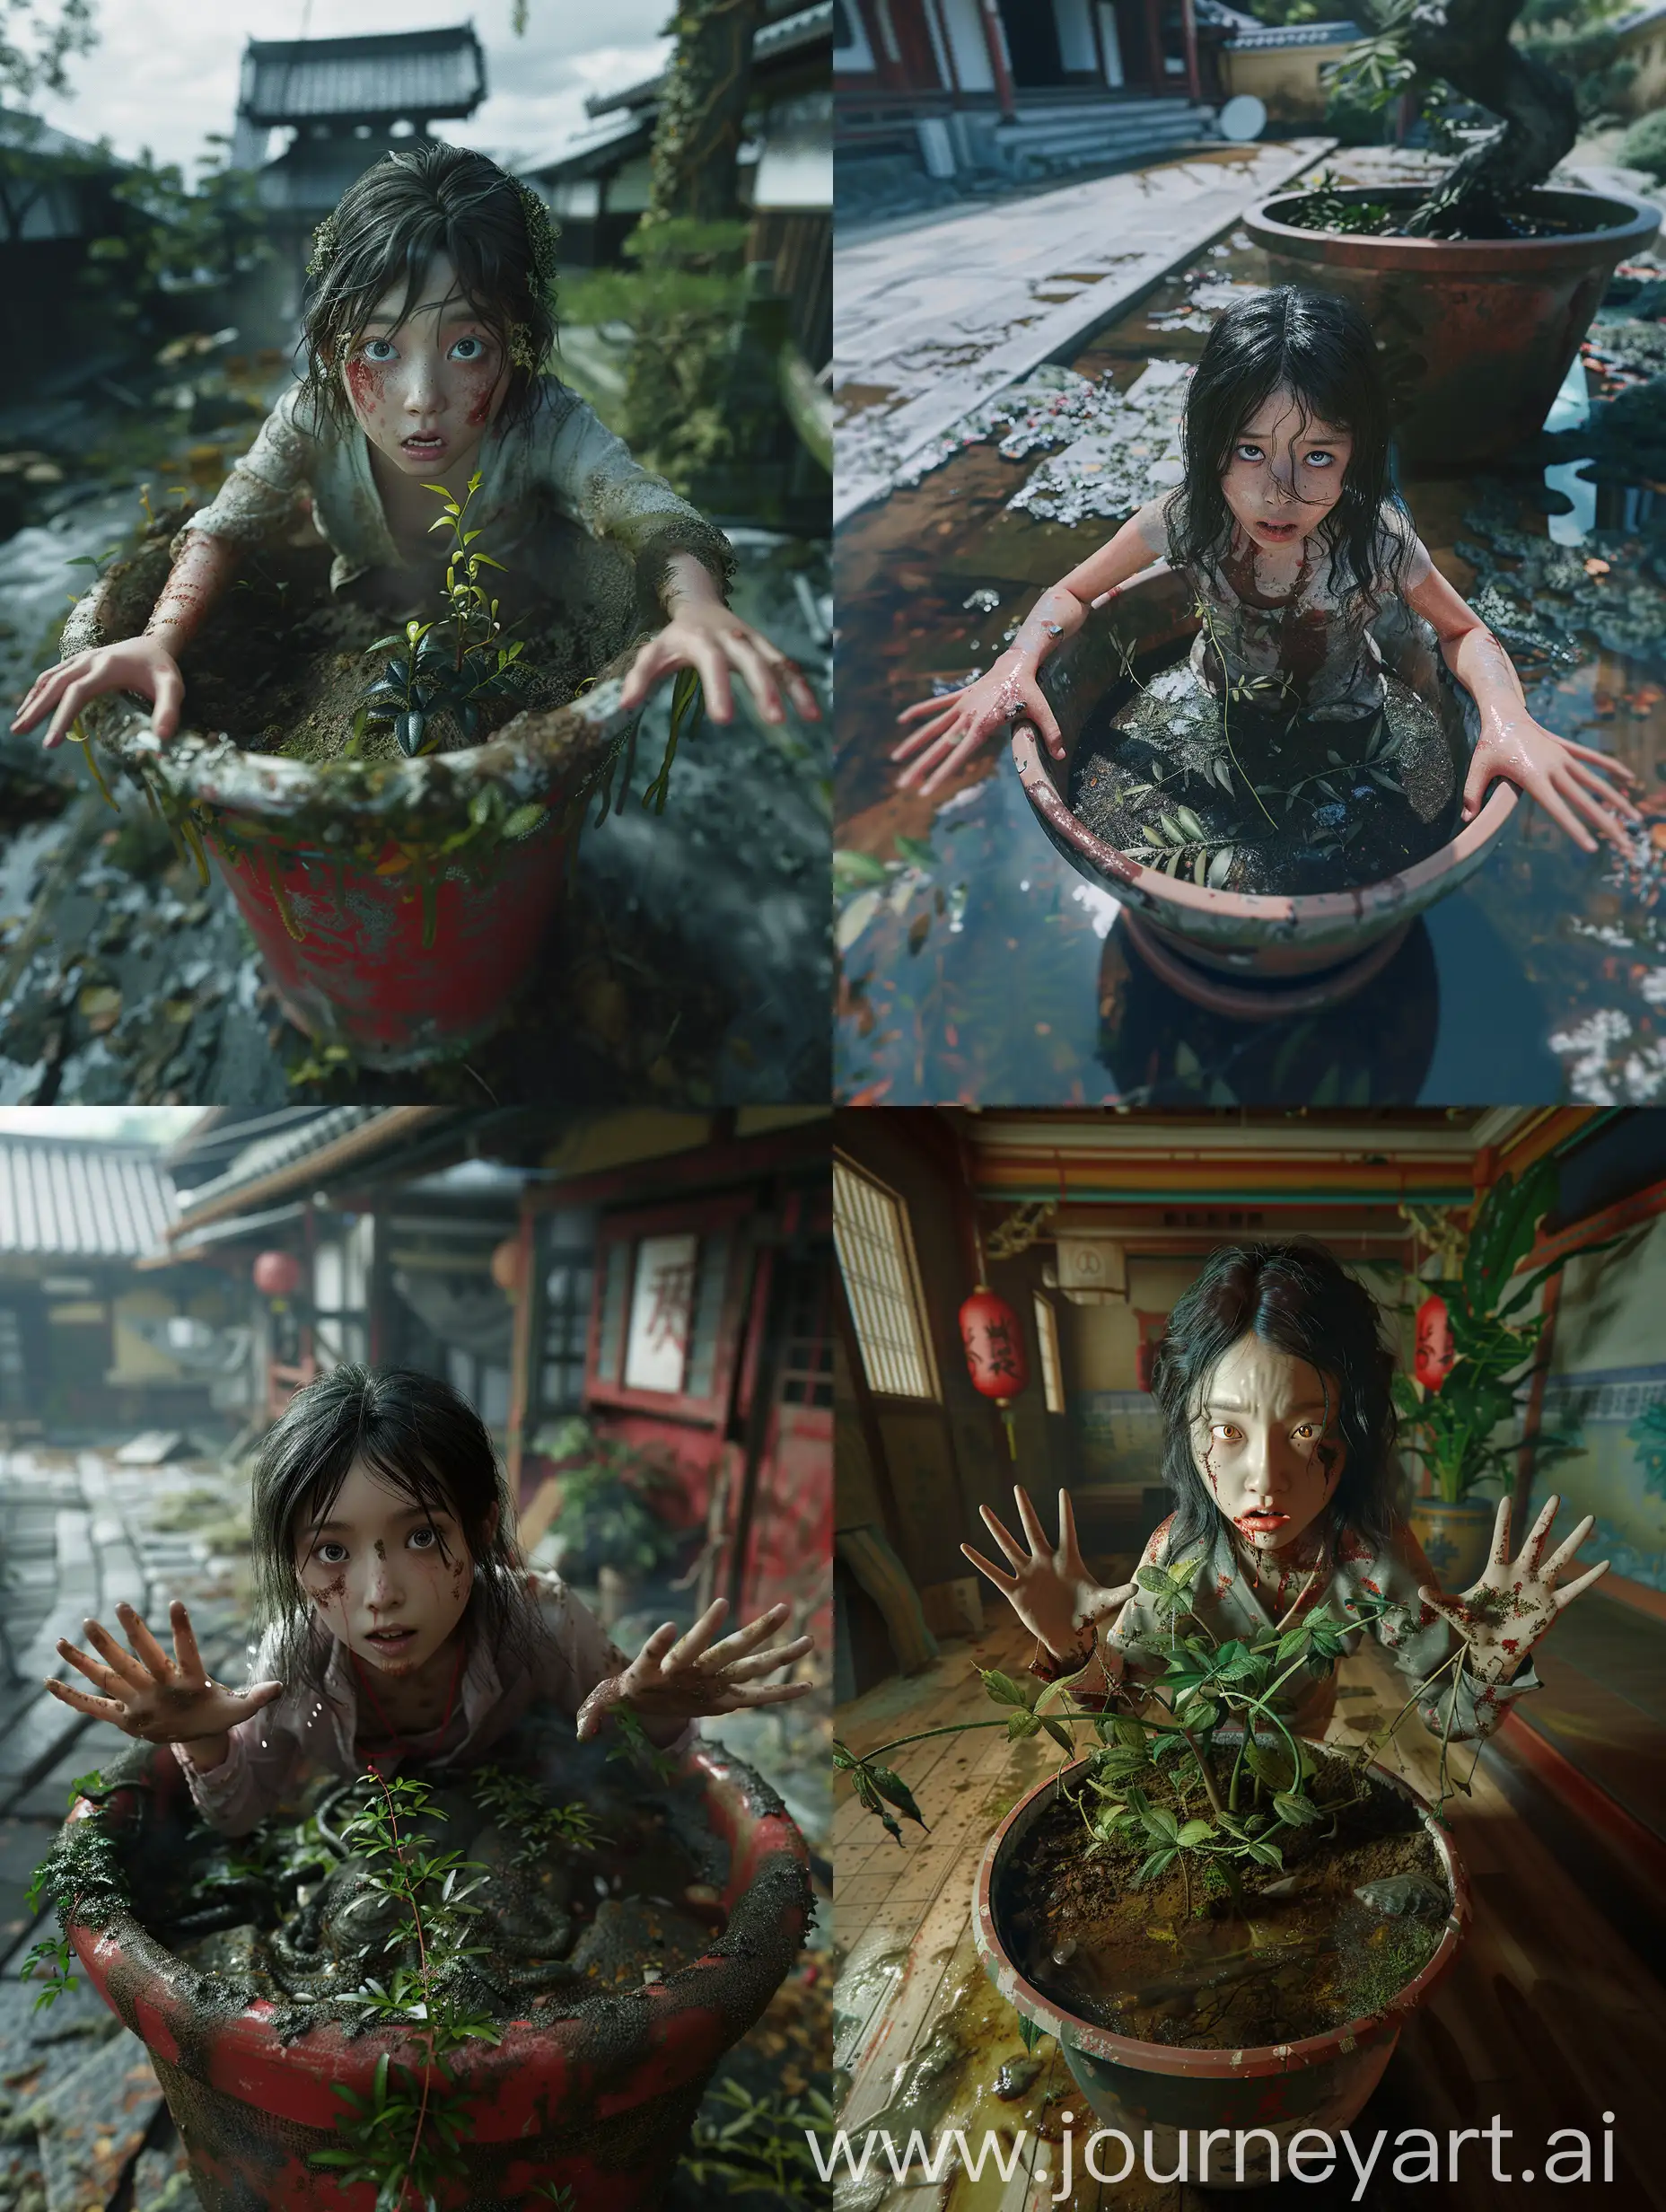 cinematic, realism, Using (((imagination))) to craft a photorealistic representation of an unusual fantasy dream, this image should be a panoramic shot, skillfully captured through an EE 70mm lens, providing a professional movie feel. The shot opens with a long-angle shot view of a picturesque scene, Capturing an abandoned Japanese temple, a young girl grows inside a potted plant. Her body, hands and feet grow into planted in the soil. yokai from Japan, The UHD camera captures every detail of this moment, highlighting the colors and textures. With Scorsese's expert direction, this scene exudes drama, Generate a cinematic and highly detailed Al image, Render her in a photorealistic style, cinematic, capturing the fine details of her features, clothing, and surroundings. The woman should exude with a feeling of fear, Pay close attention to realistic skin tones, textures, and lighting conditions. Ensure the image is in high resolution, such as 8K, to showcase the intricate details and allow